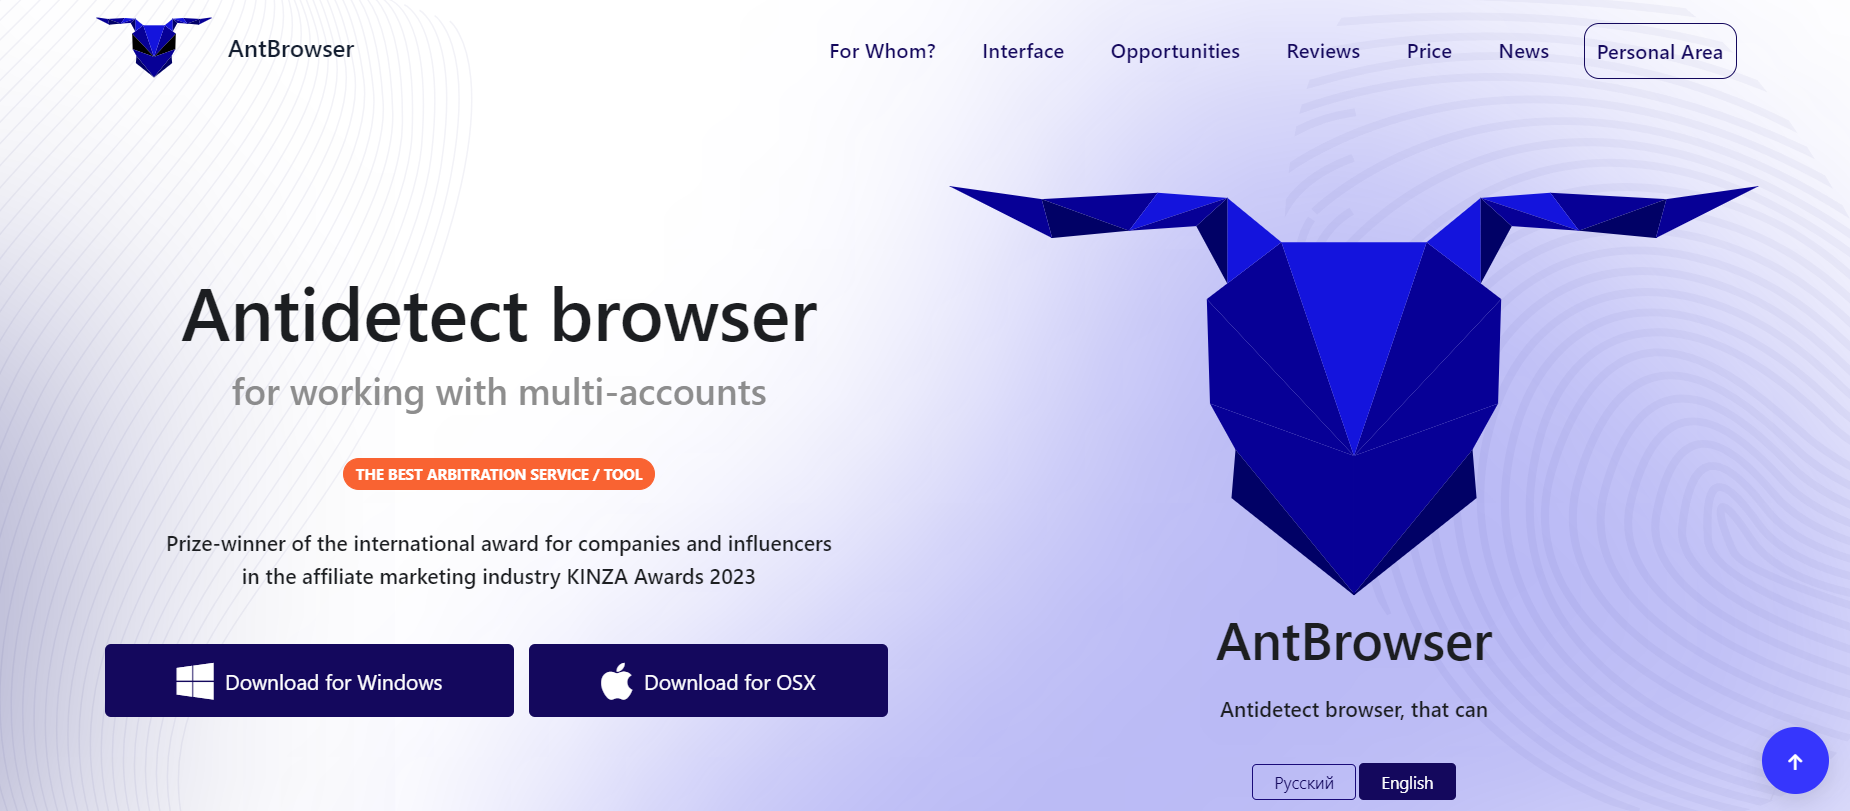 Ant Browser